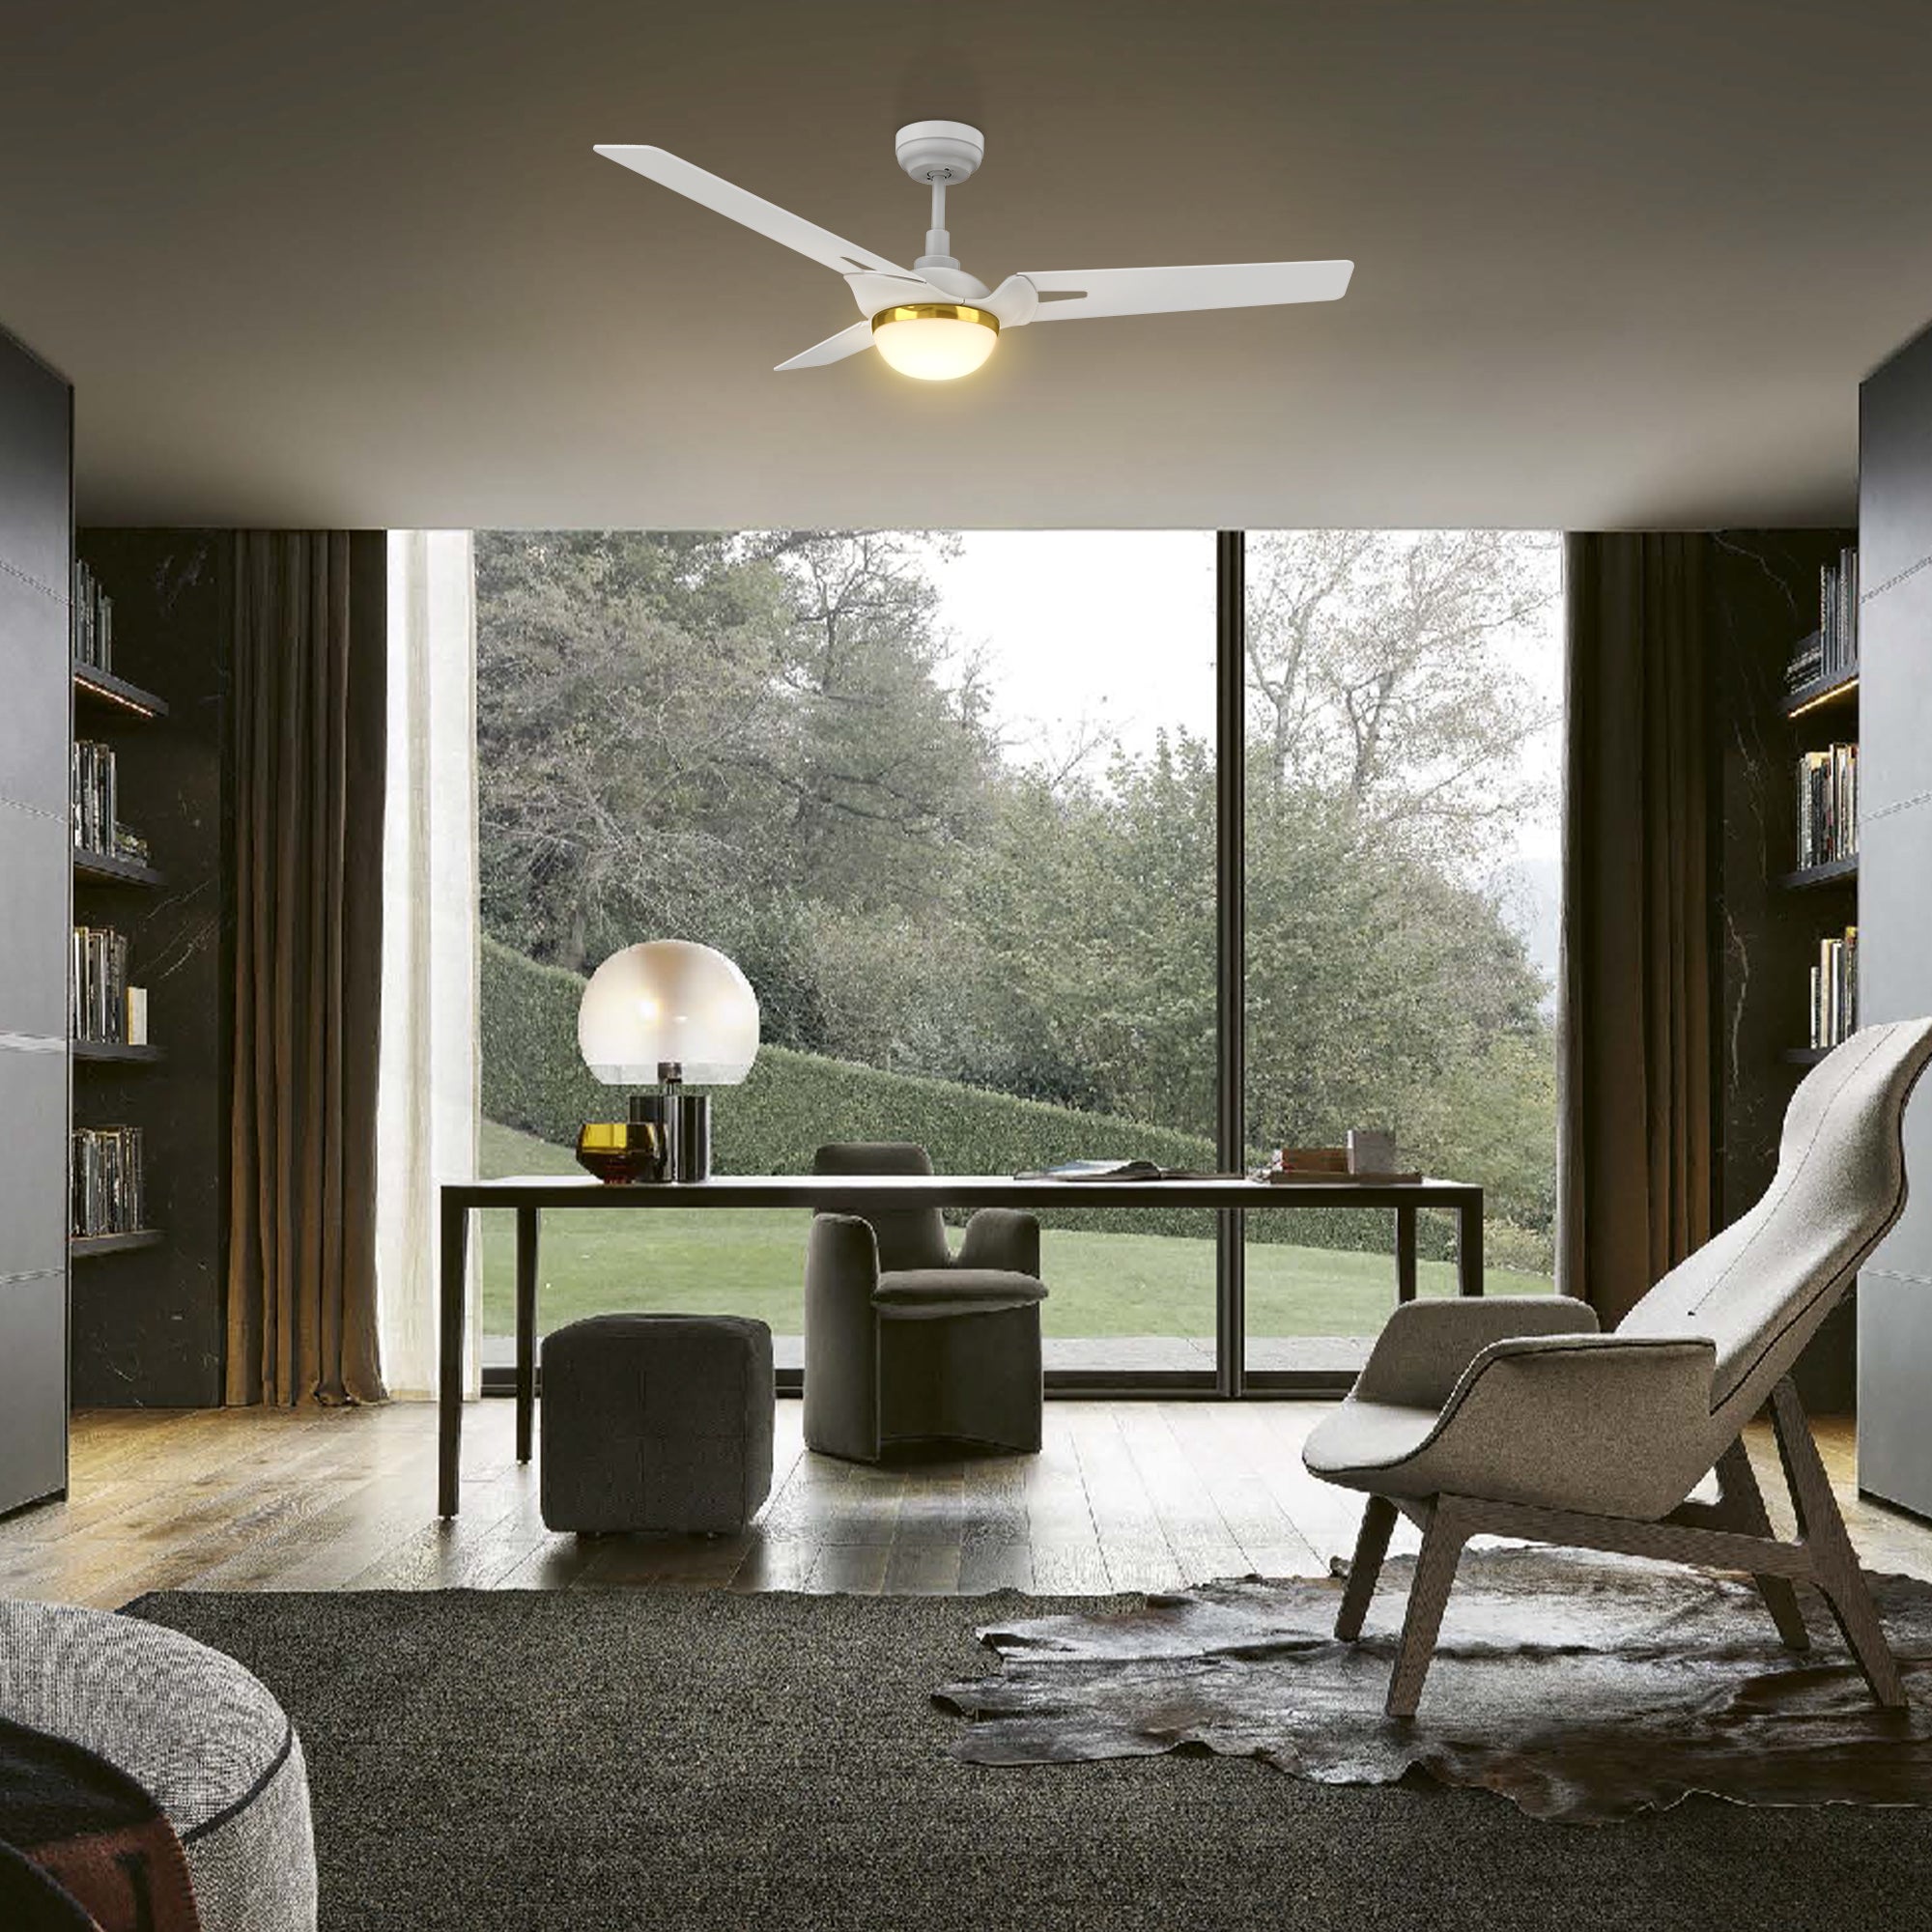 This Clifden 52&#39;&#39; smart ceiling fan keeps your space cool, bright, and stylish. It is a soft modern masterpiece perfect for your large indoor living spaces. This Wifi smart ceiling fan is a simplicity designing with White finish, use elegant Plywood blades and has an integrated 4000K LED daylight. The fan features Remote control, Wi-Fi apps, Siri Shortcut and Voice control technology (compatible with Amazon Alexa and Google Home Assistant ) to set fan preferences.